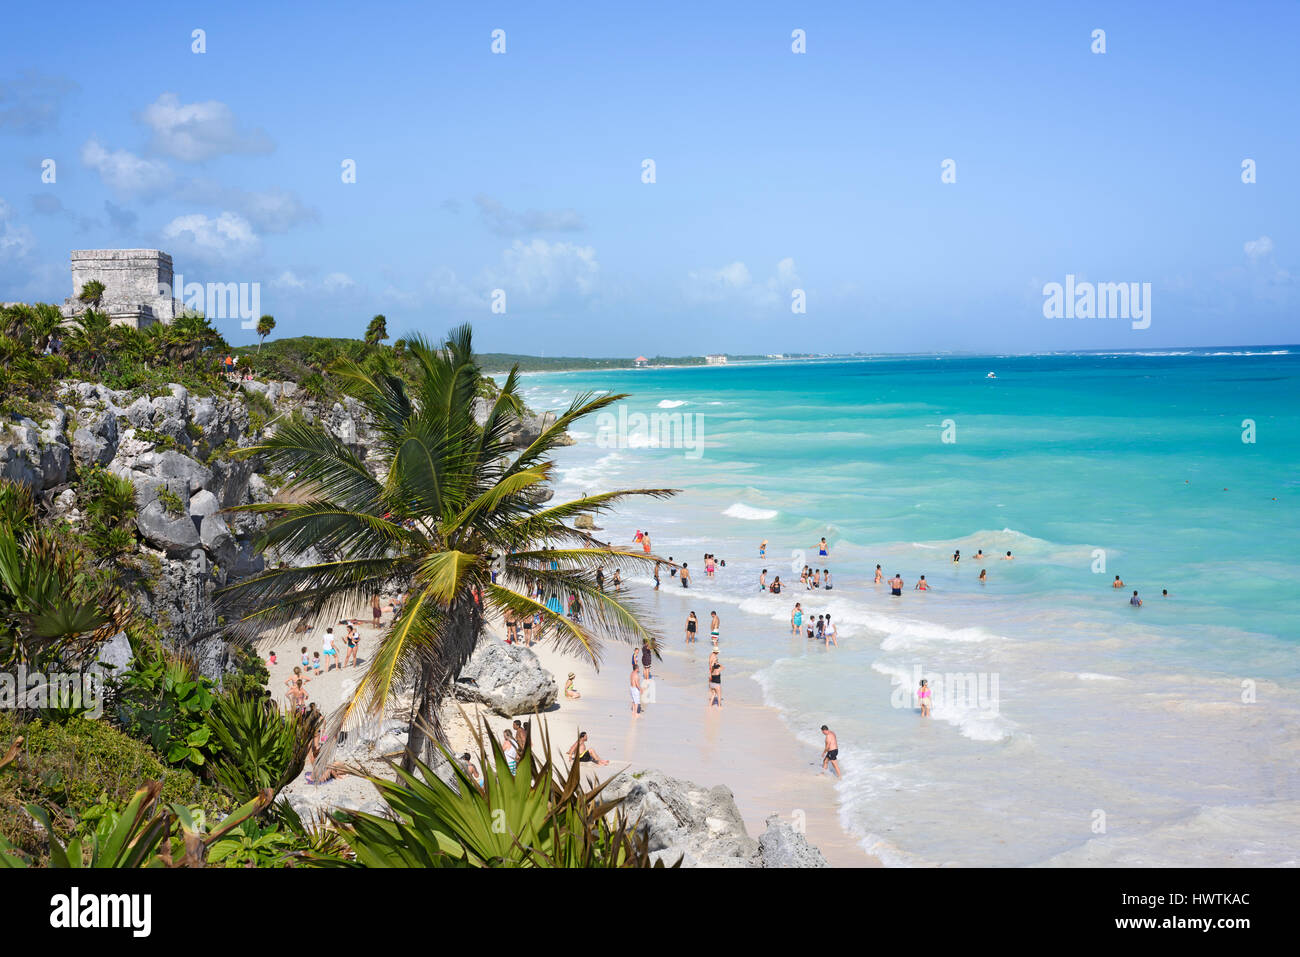 Top view of the Caribbean Sea under blue sky, people having fun on beach in Tulum, Yucatan, Mexico, green tropical plant palm trees foreground Stock Photo